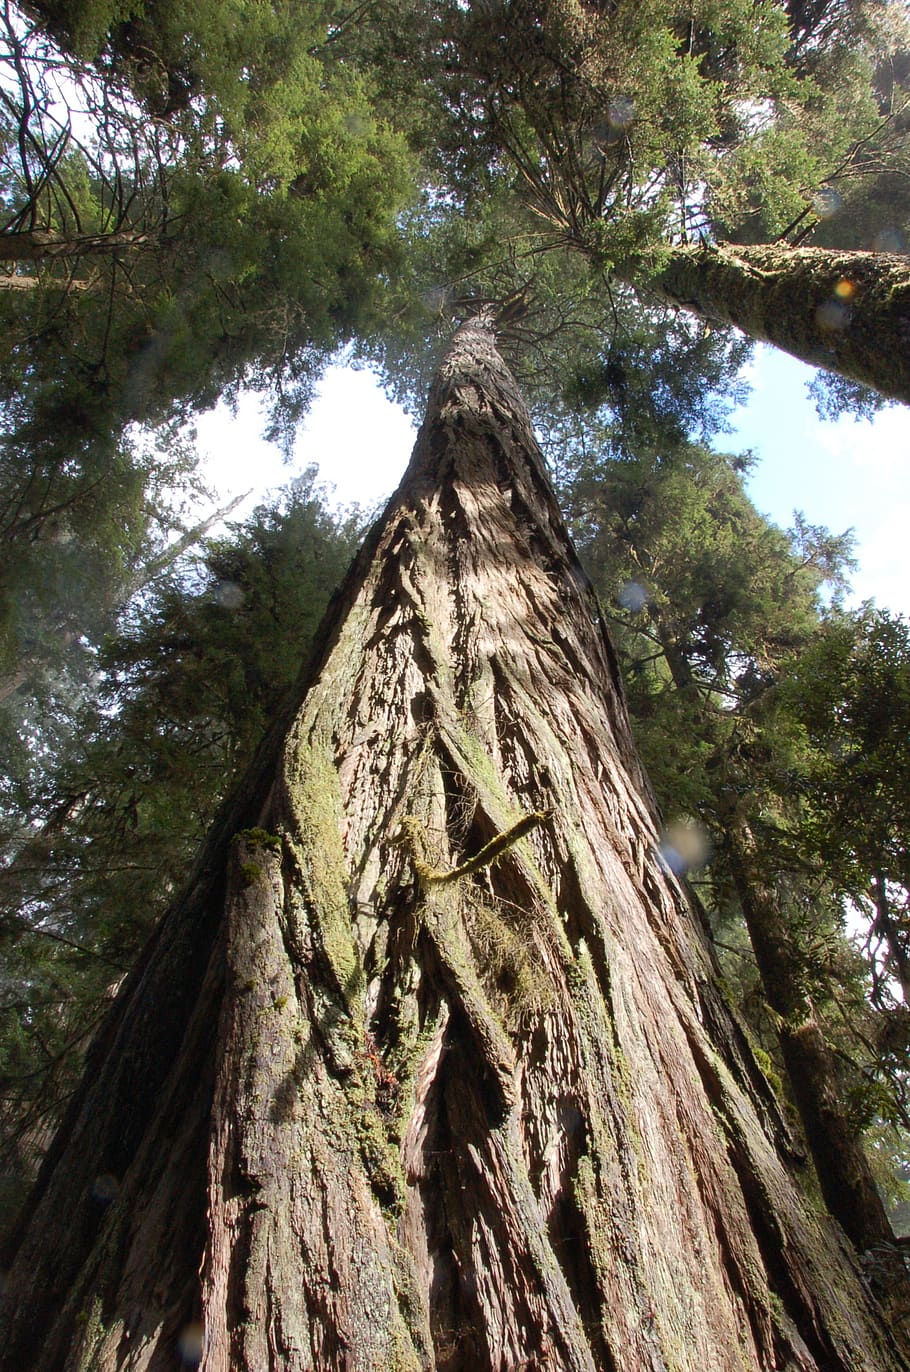 california redwoods, redwood trees, trees, redwoods, forest, woods, giant trees, tall trees, tree, low angle view